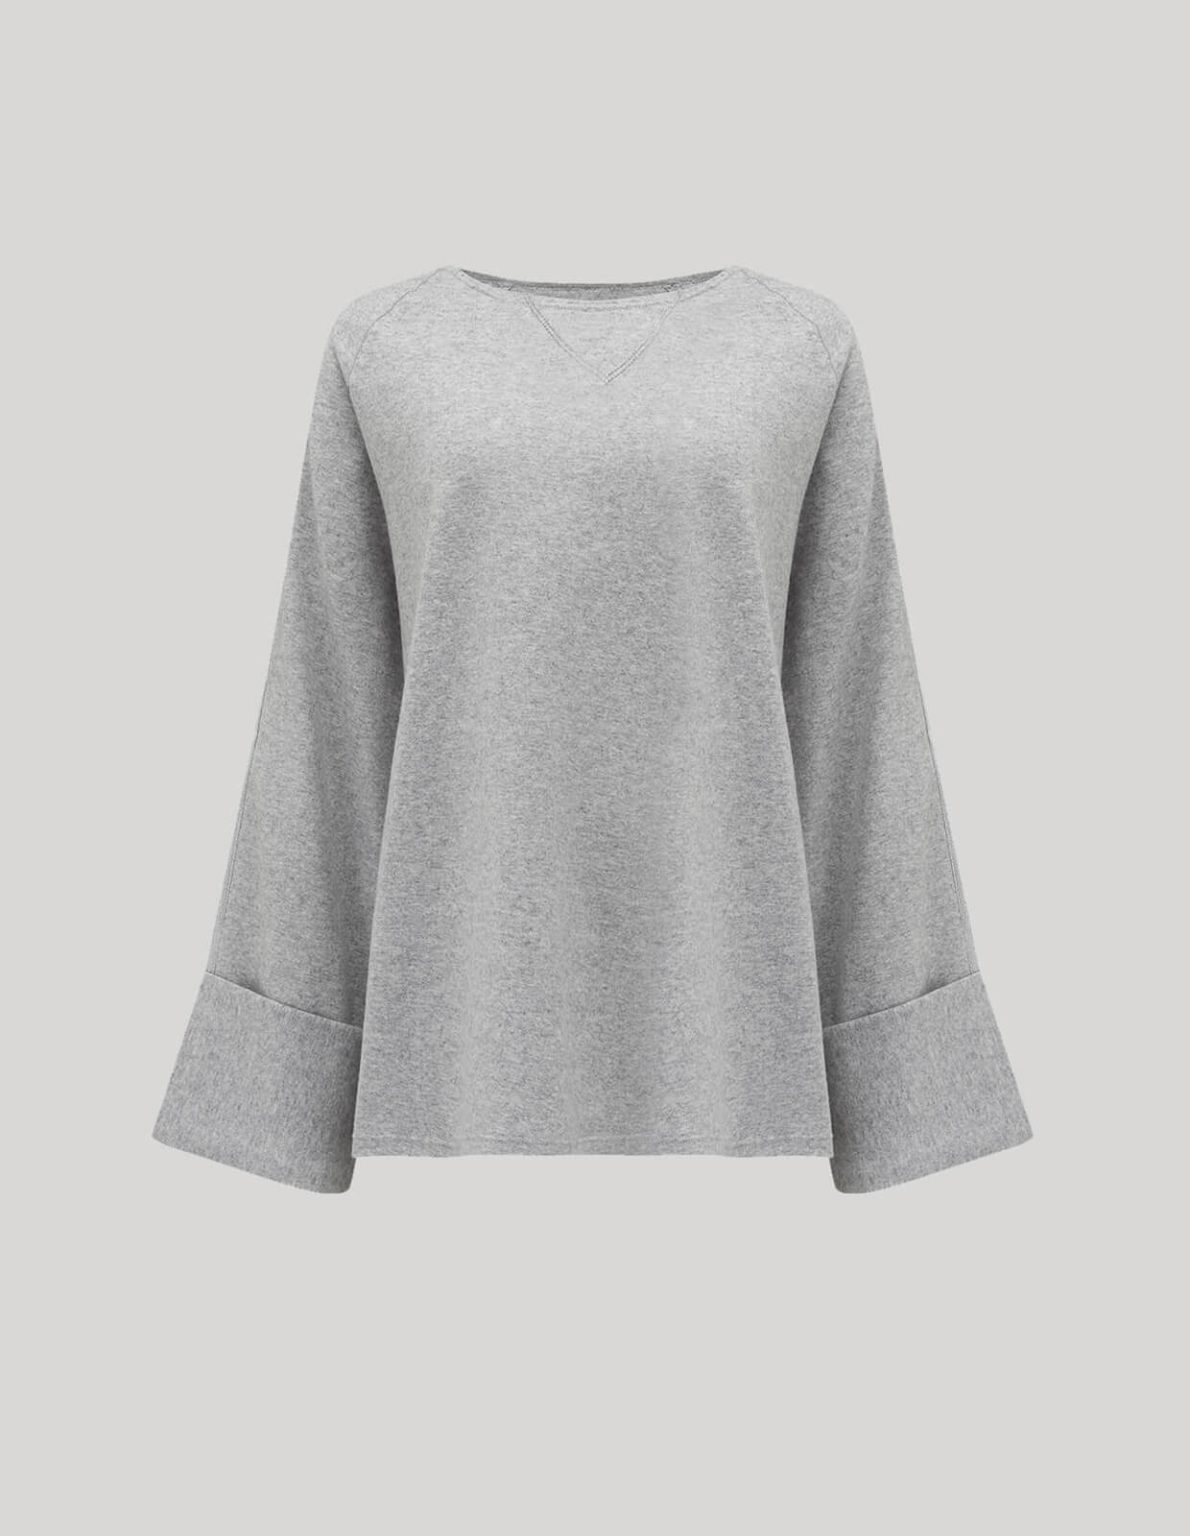 The Maker's Atelier Two Contemporary Sweatshirts - The Fold Line